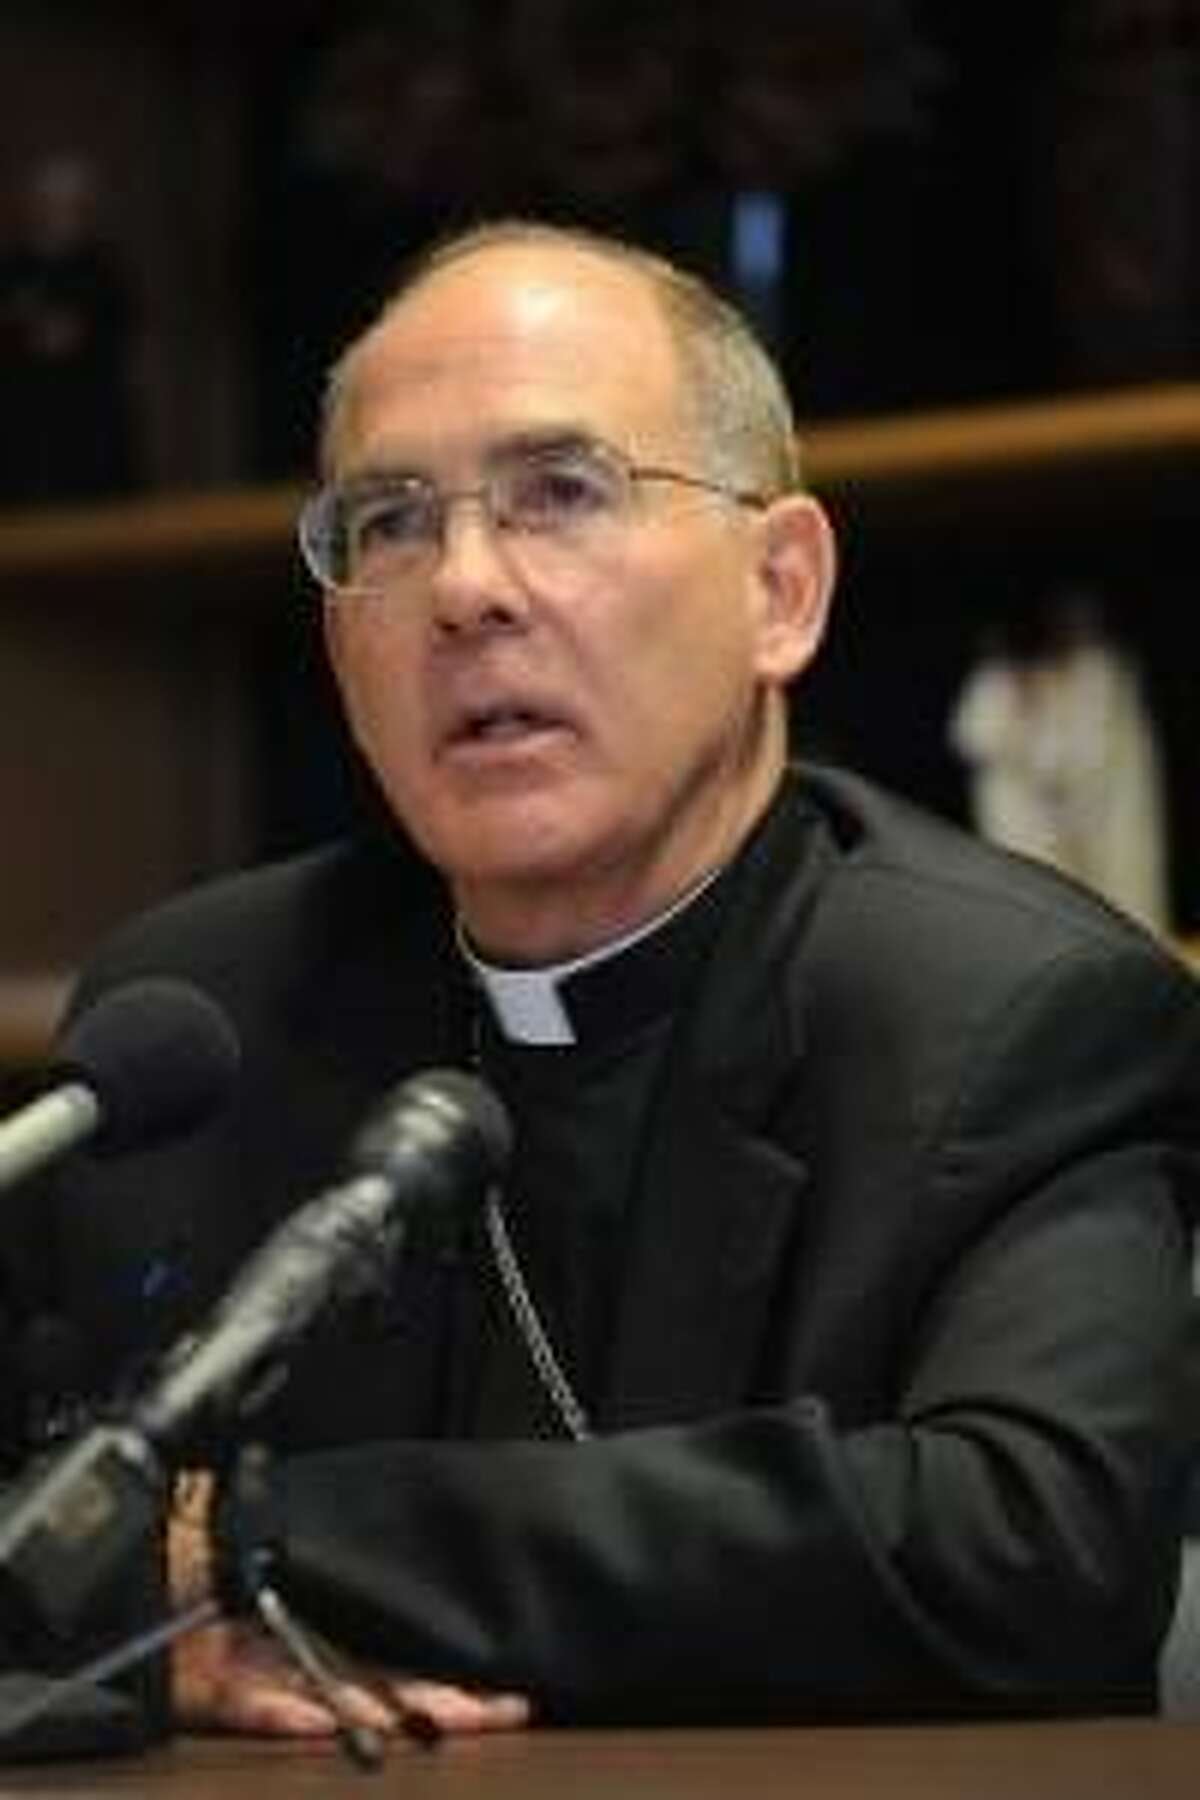 Archbishop J. Peter Sartain has faced Seattle news media just once, on the day he arrived in town.